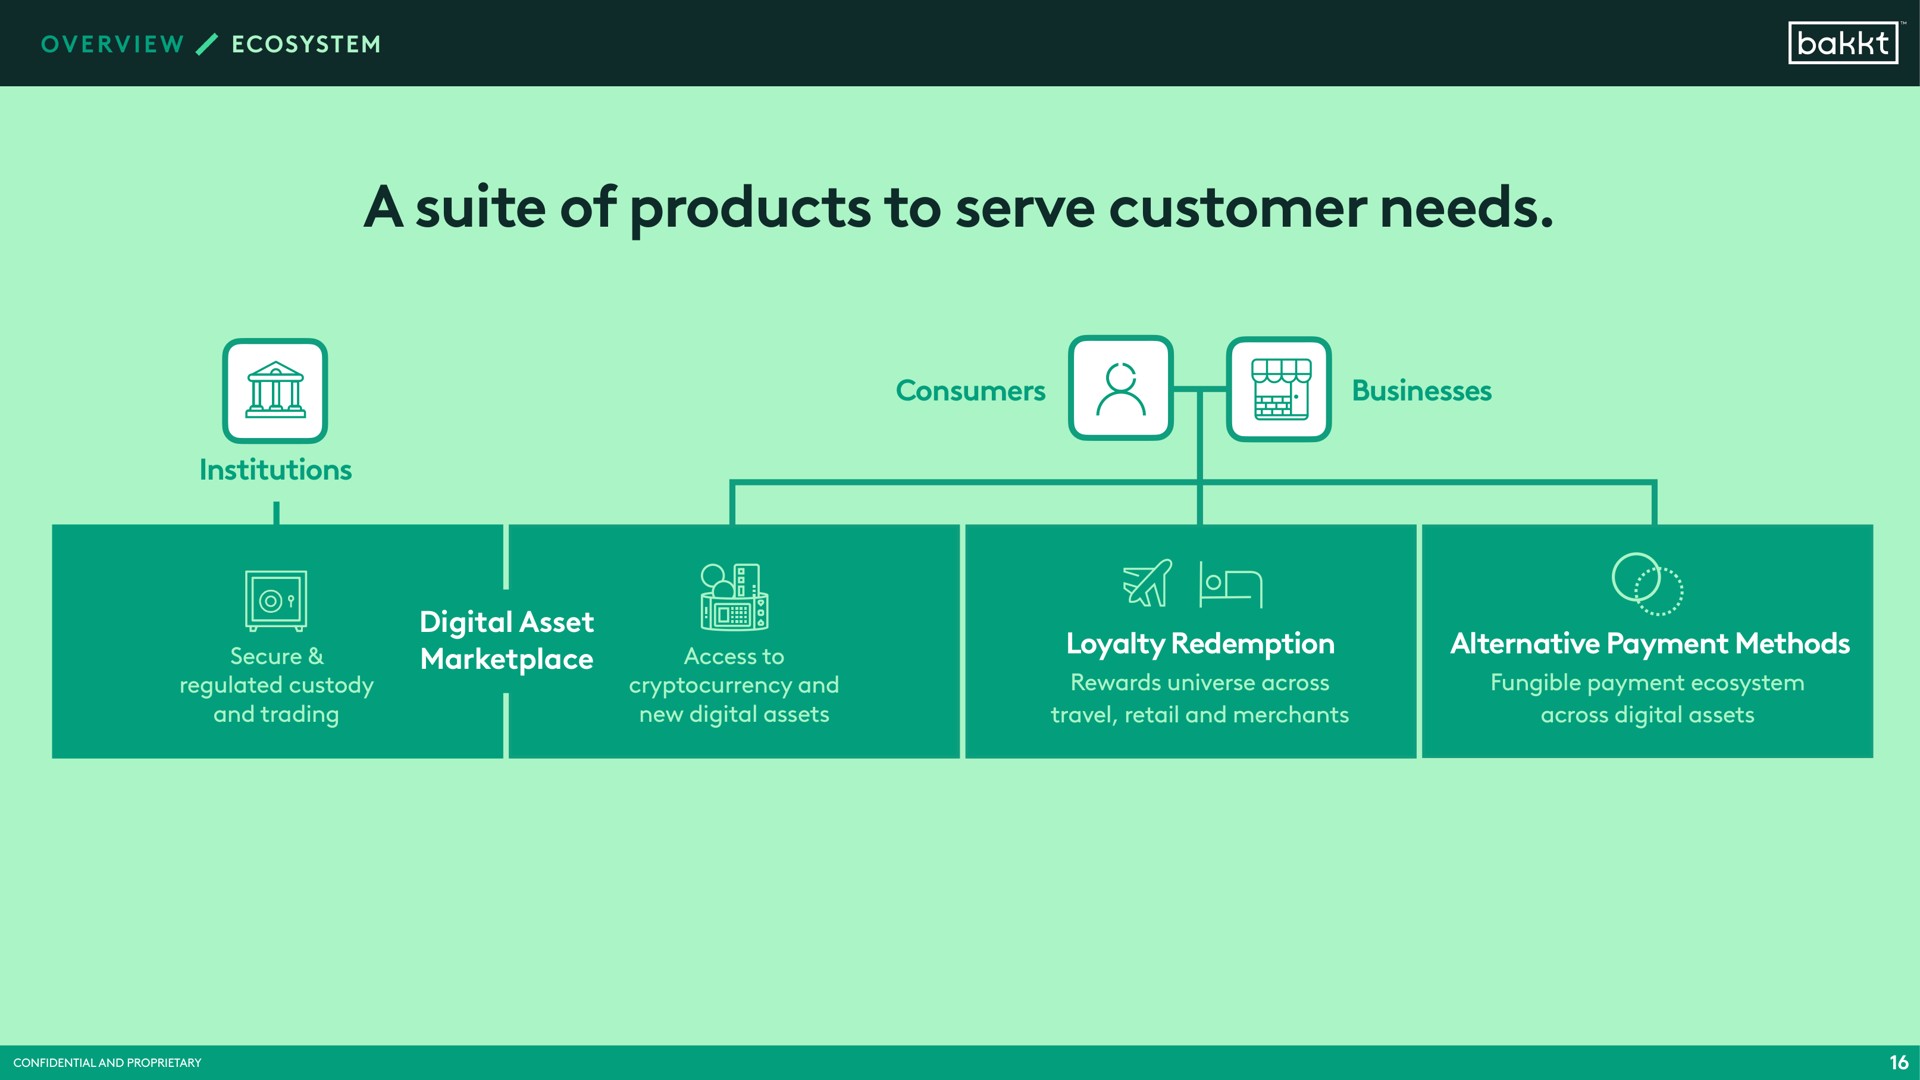 a suite of products to serve customer needs | Bakkt